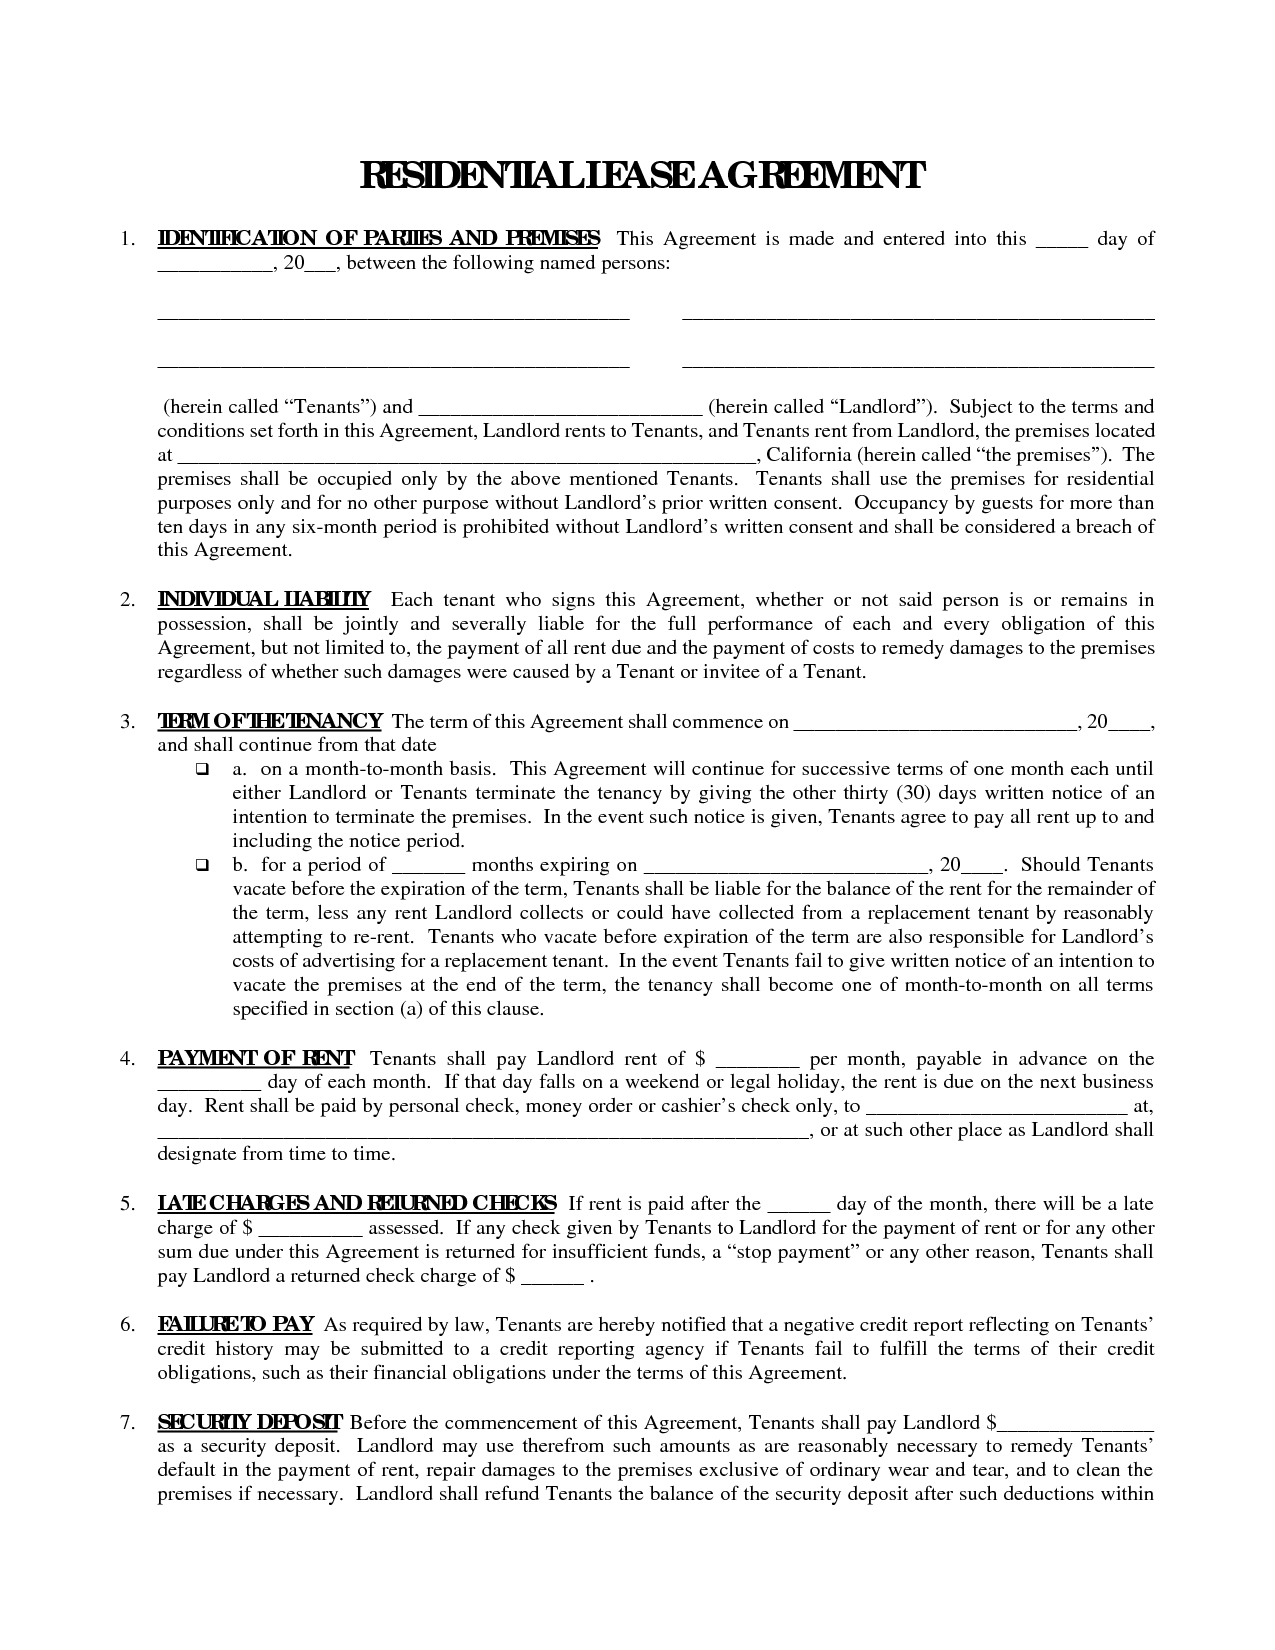 Printable Residential Free House Lease Agreement | Residential Lease - Free Printable Residential Rental Agreement Forms